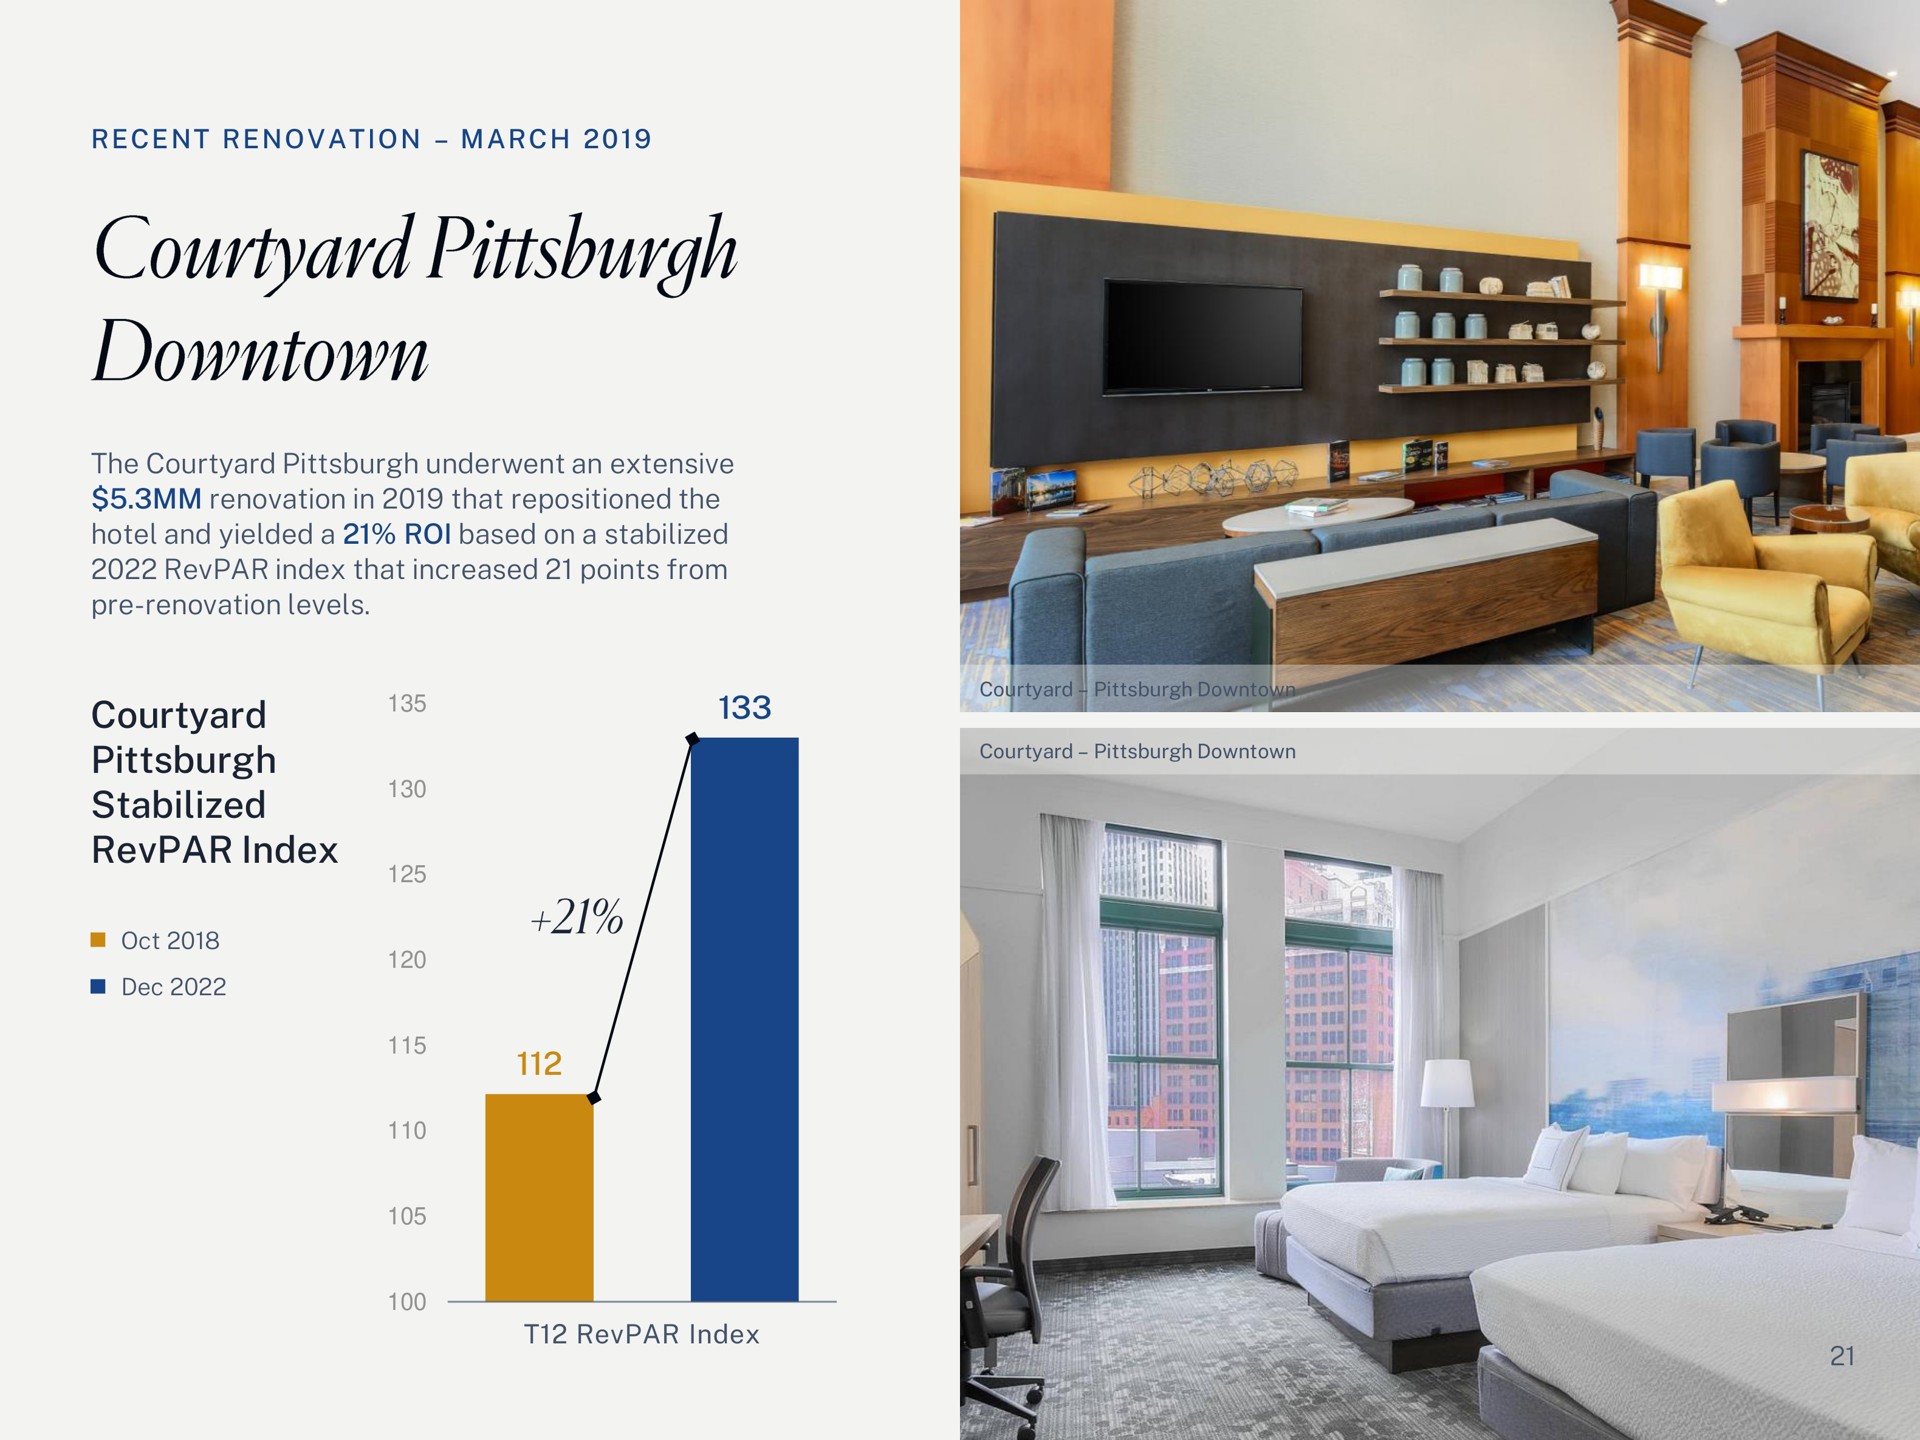 march the courtyard underwent an extensive renovation in that repositioned the hotel and yielded a roi based on a stabilized index that increased points from renovation levels courtyard stabilized index index downtown | Summit Hotel Properties